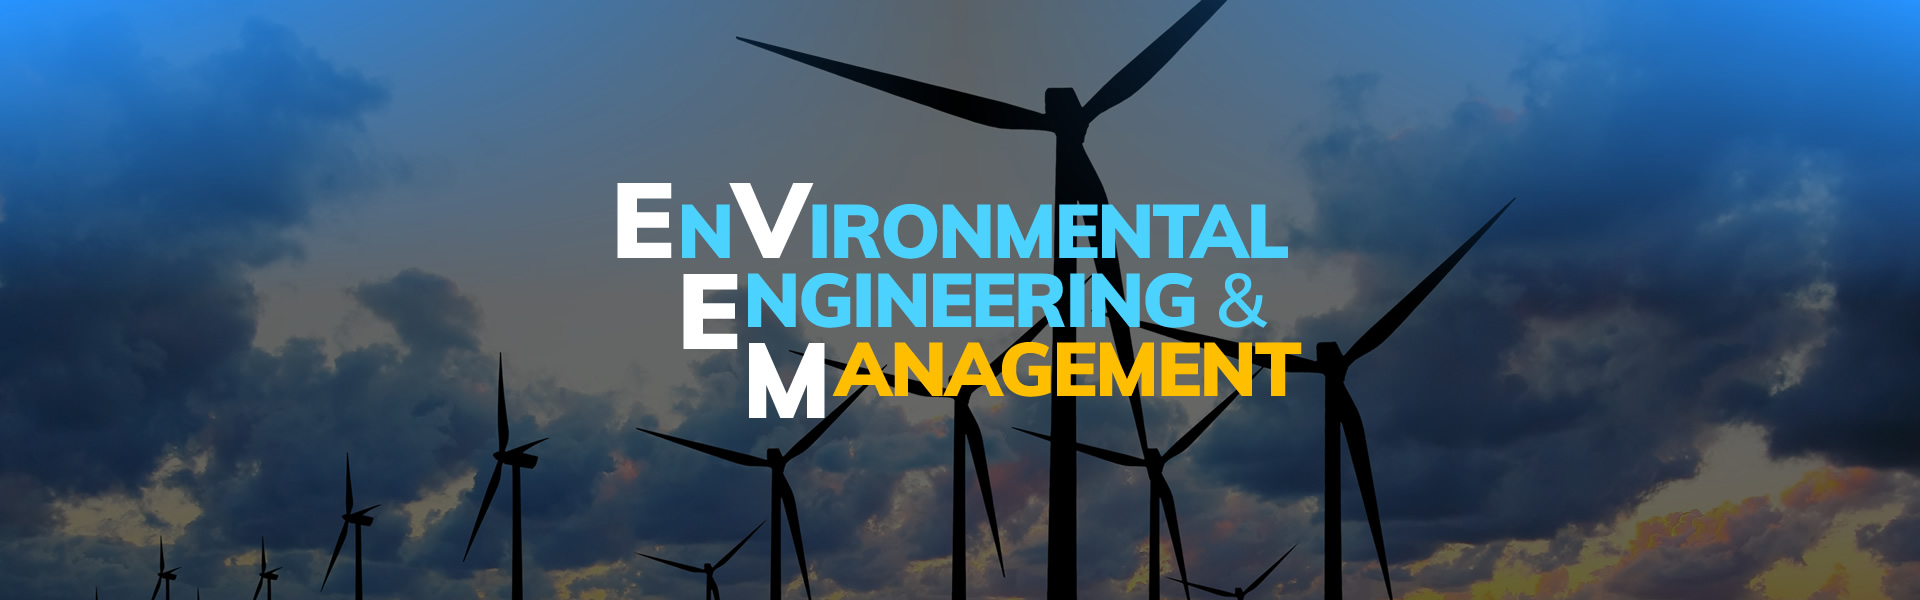 MSc in Environmental Engineering and Management